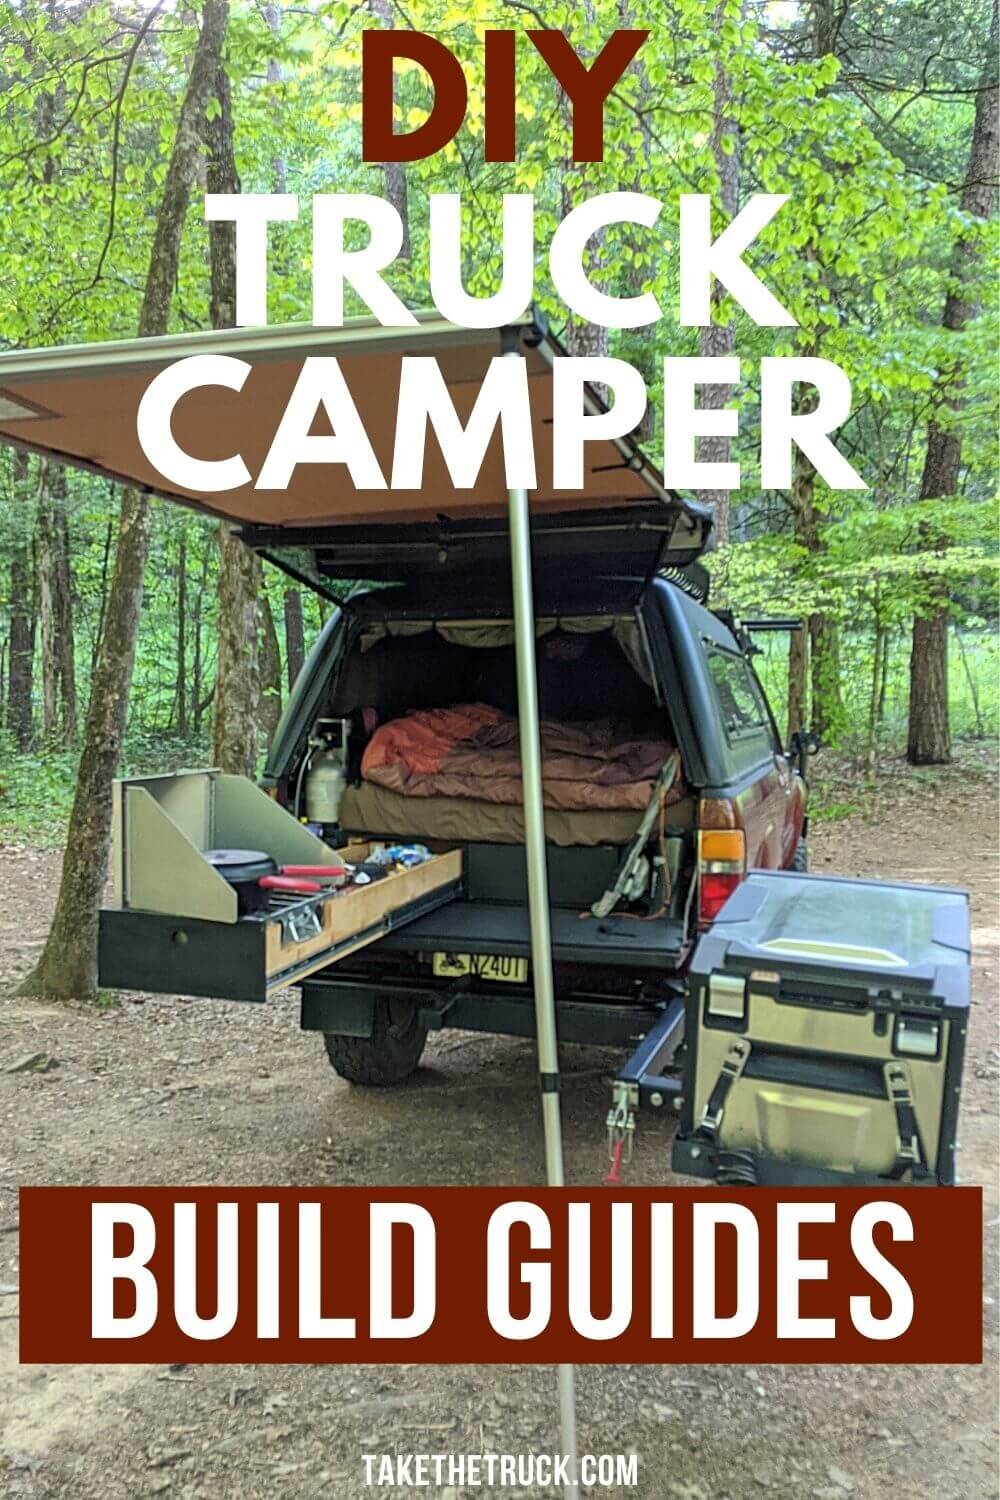 Tons of posts all about how to build a DIY truck camper and budget overland vehicle! From the truck bed camping sleeping platform to overlanding gear to the truck bed camping interior, it’s here!